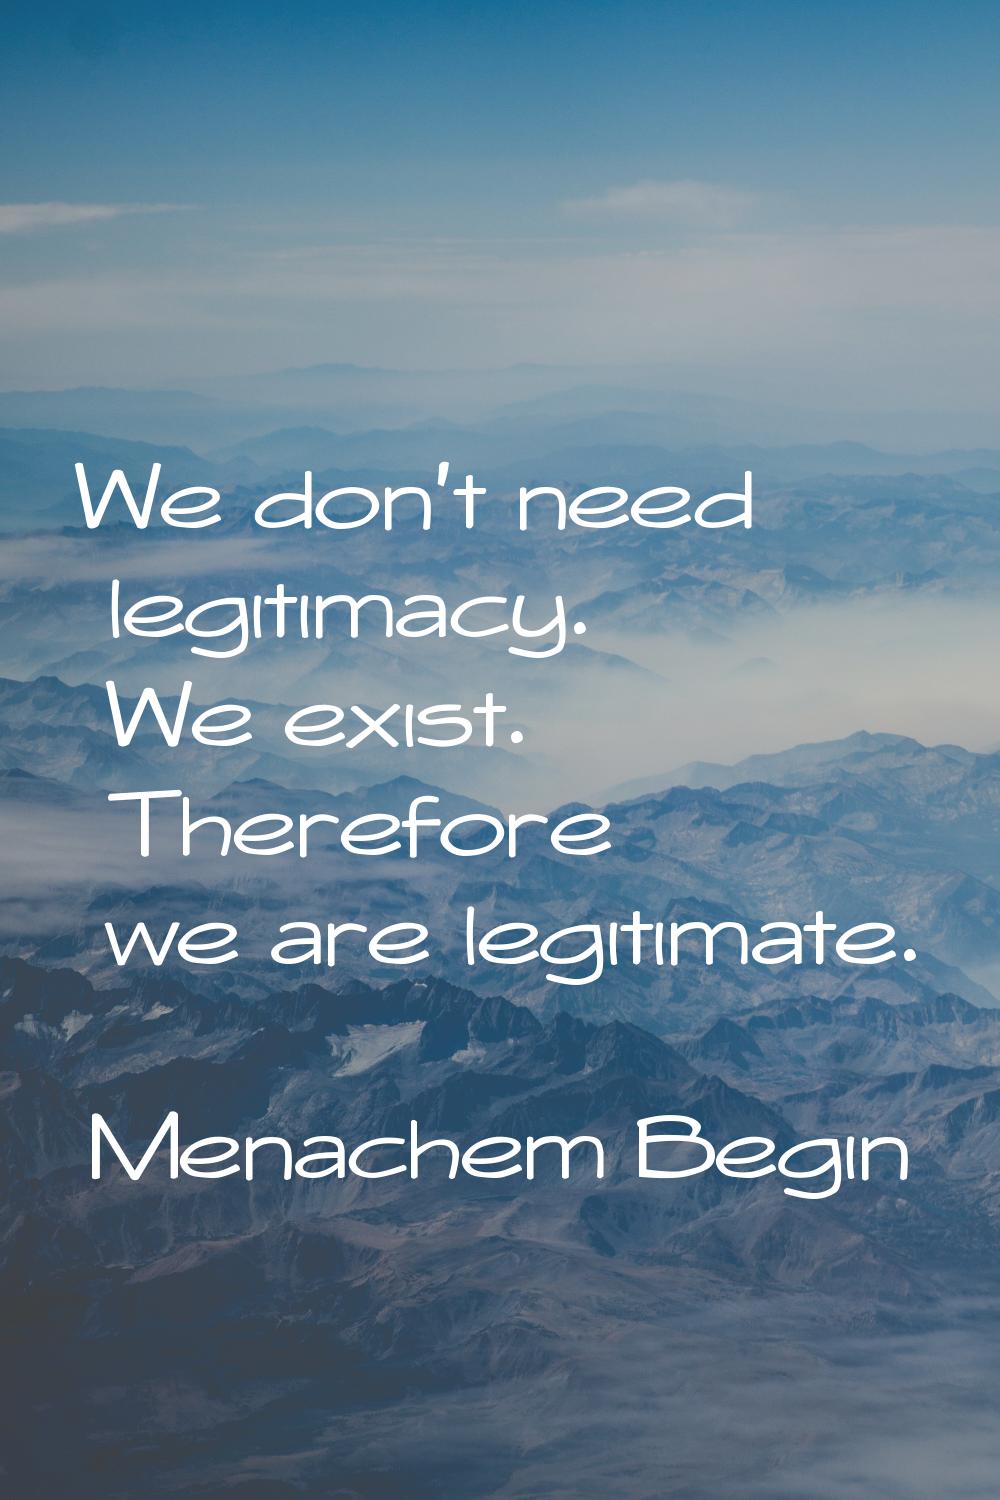 We don't need legitimacy. We exist. Therefore we are legitimate.